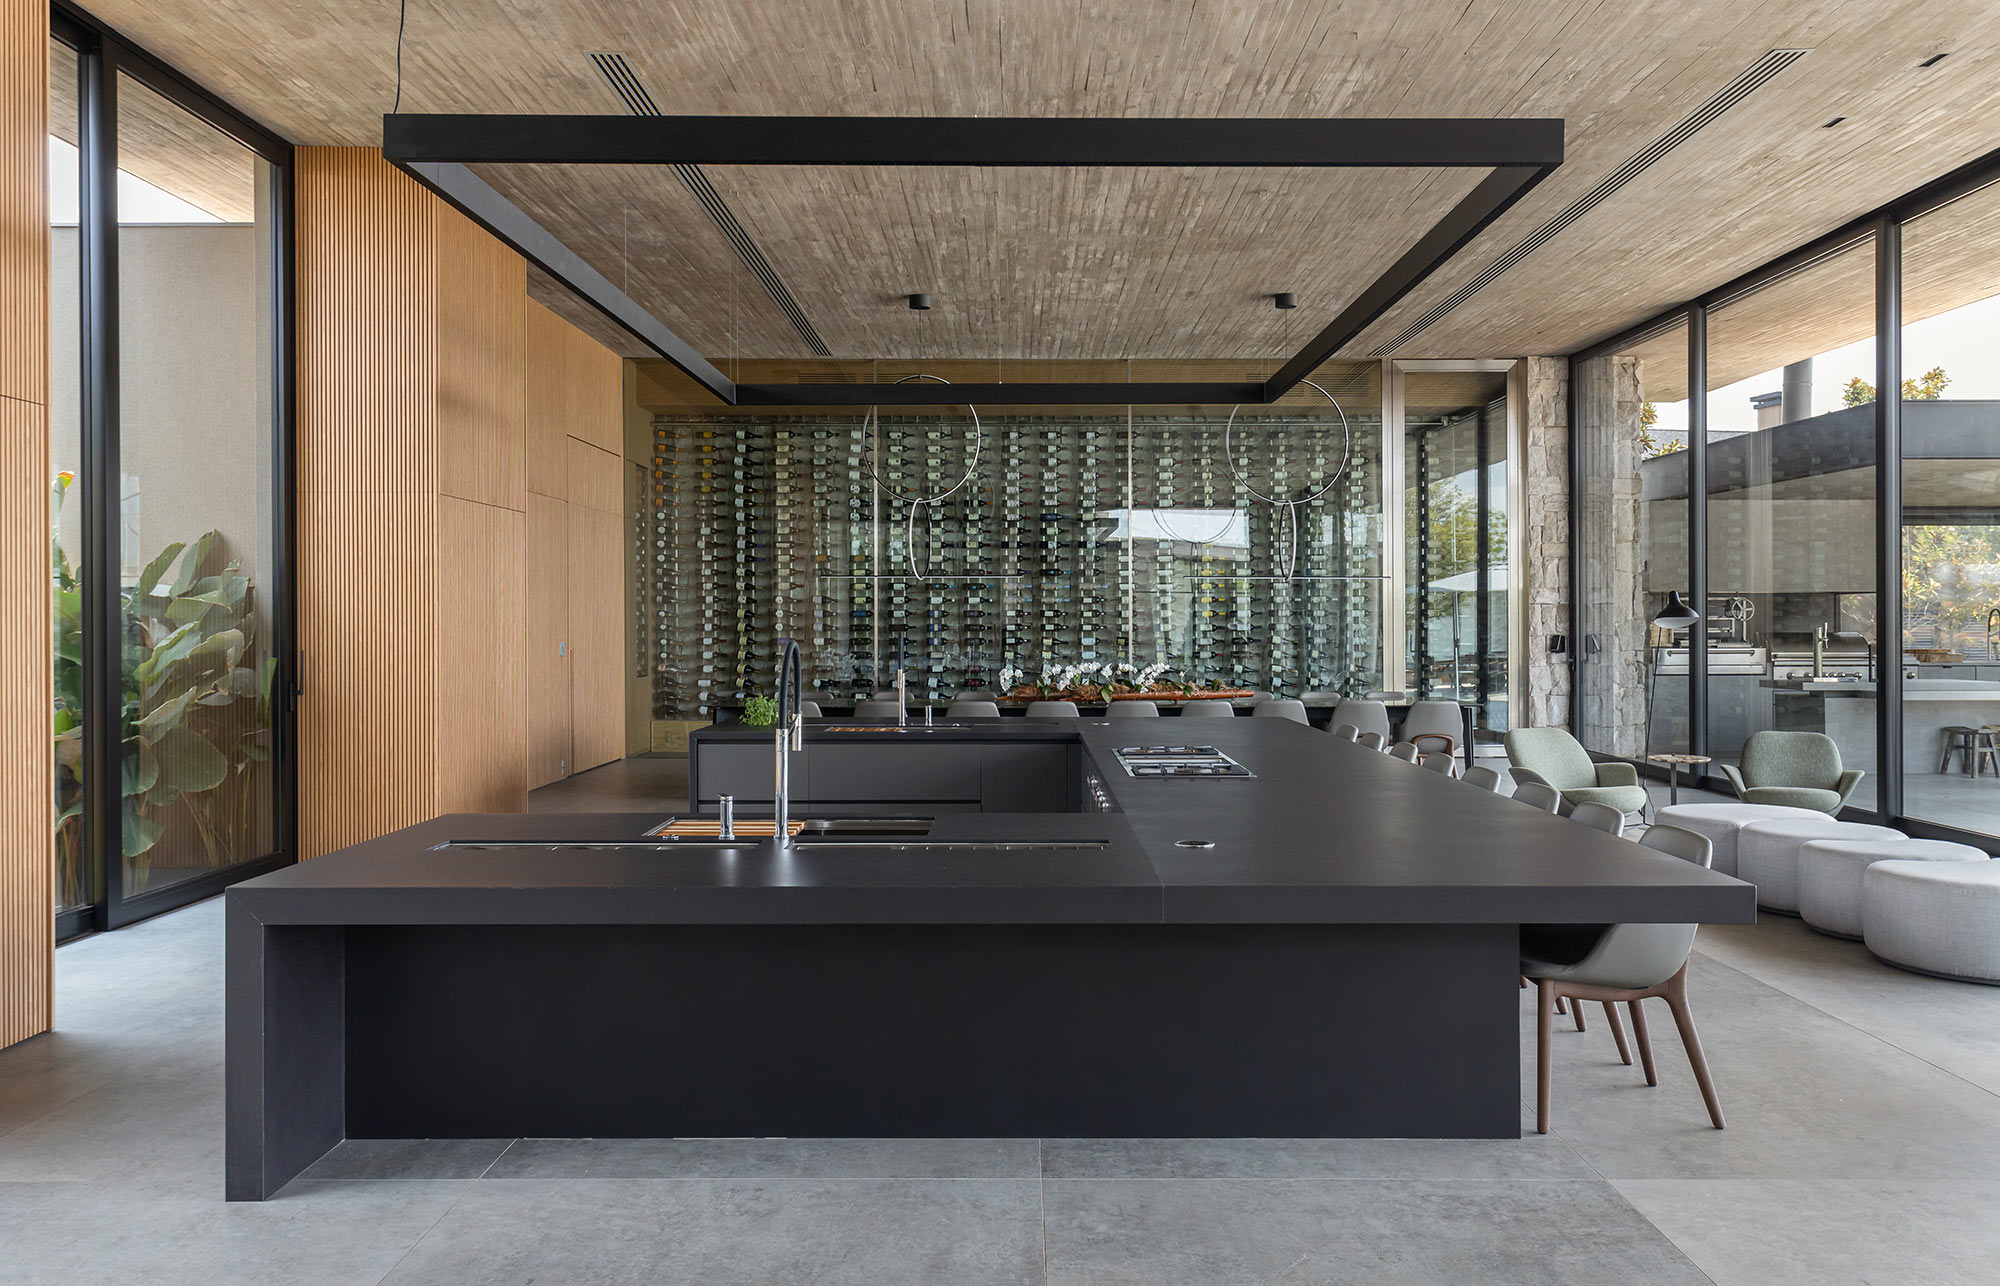 Image of Casa Hectares Dourados 14 in The transformation of a coastal New Zealand family home full of personality - Cosentino